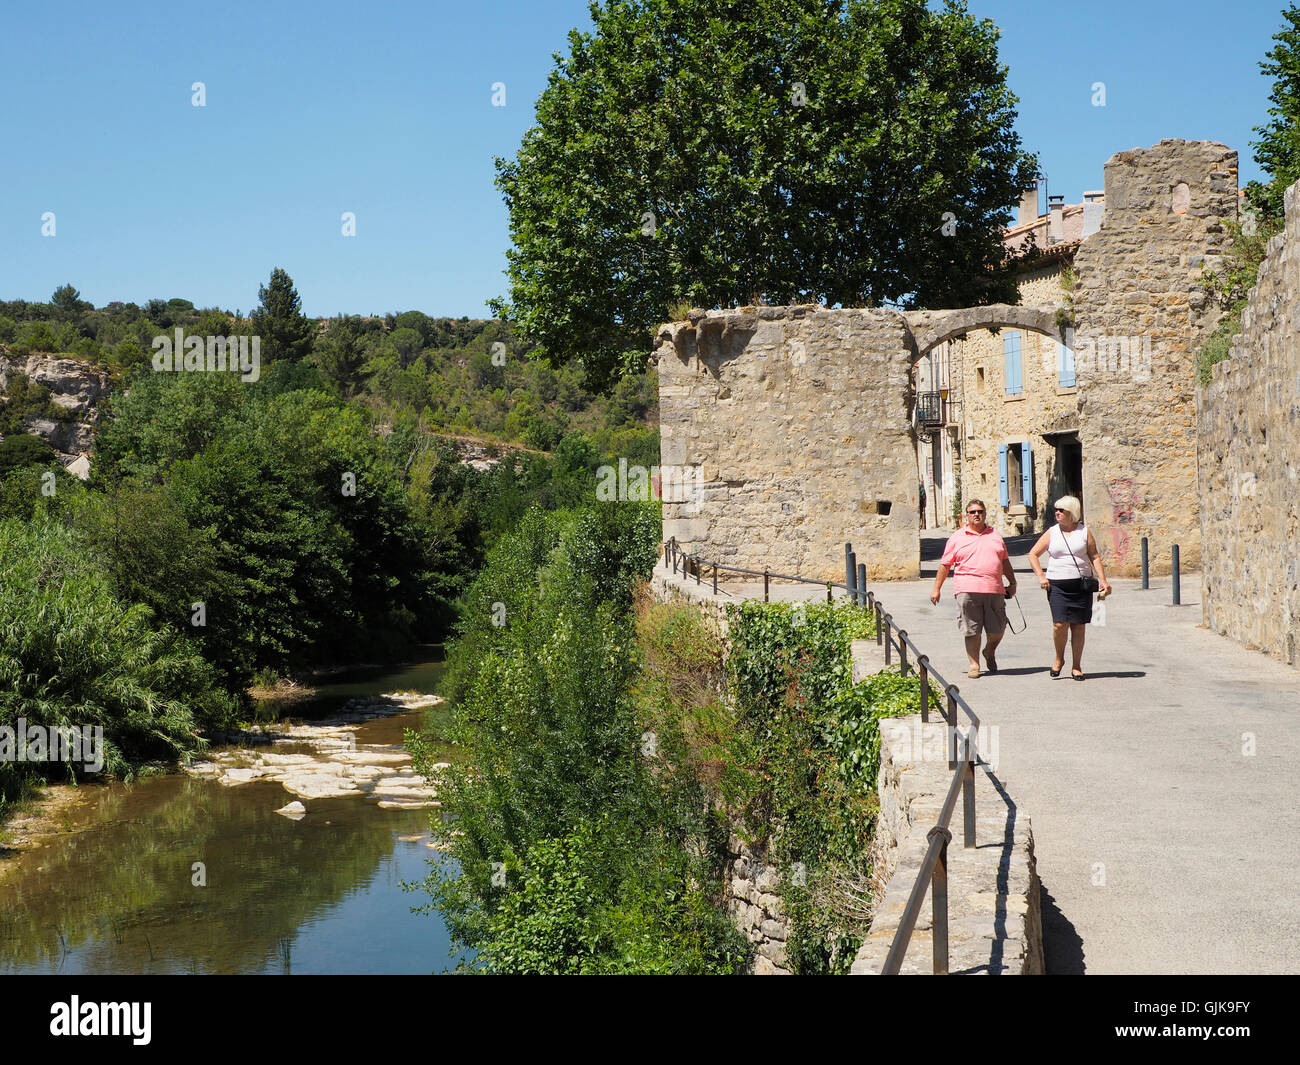 Tourists exploring the historic medieval town of Lagrasse, southern France, known for it's magnificent abbey. Stock Photo